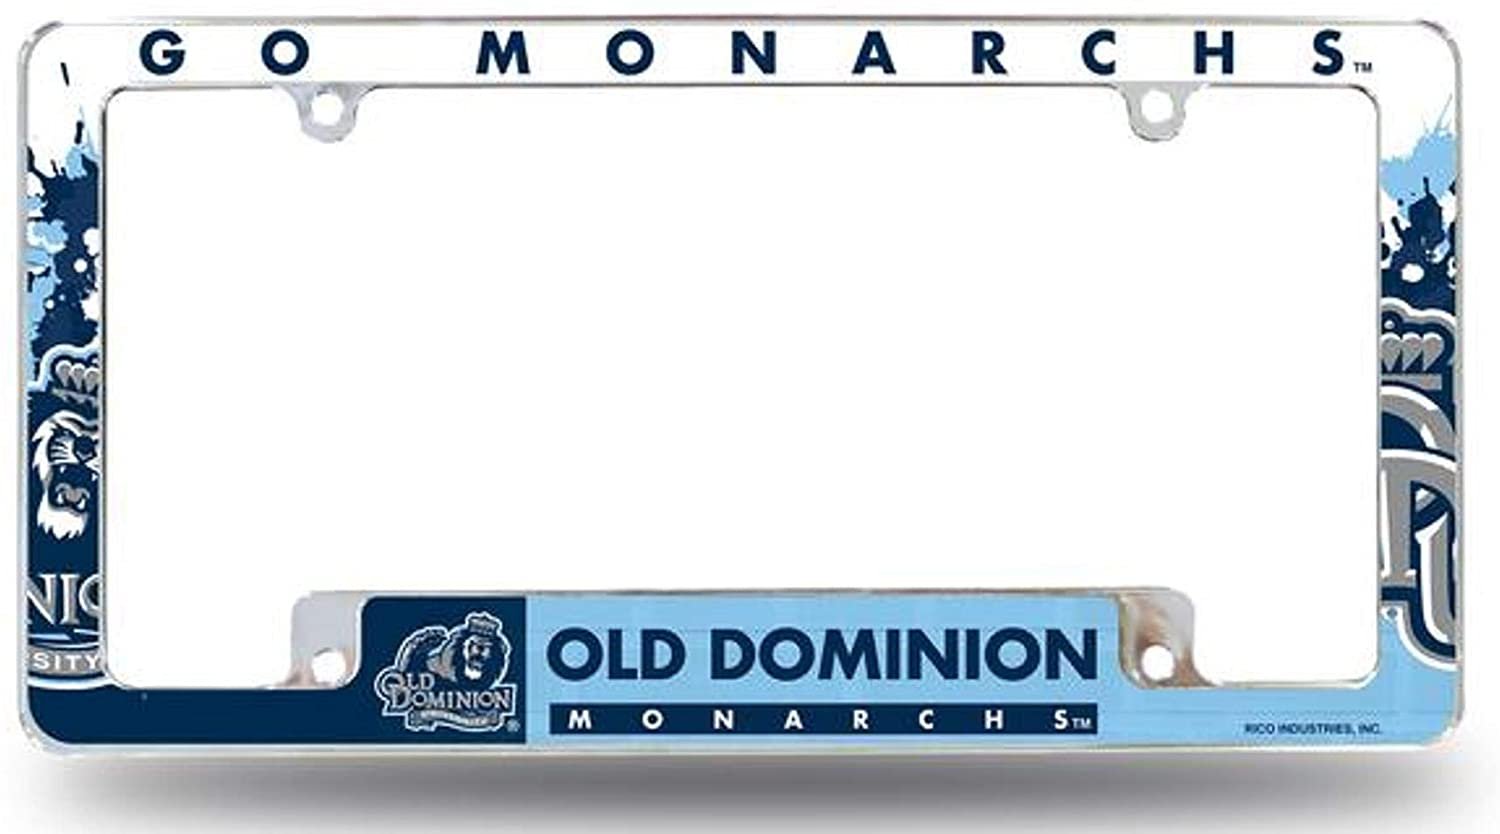 Old Dominion University Monarchs Metal License Plate Frame Tag Cover, All Over Design, 12x6 Inch